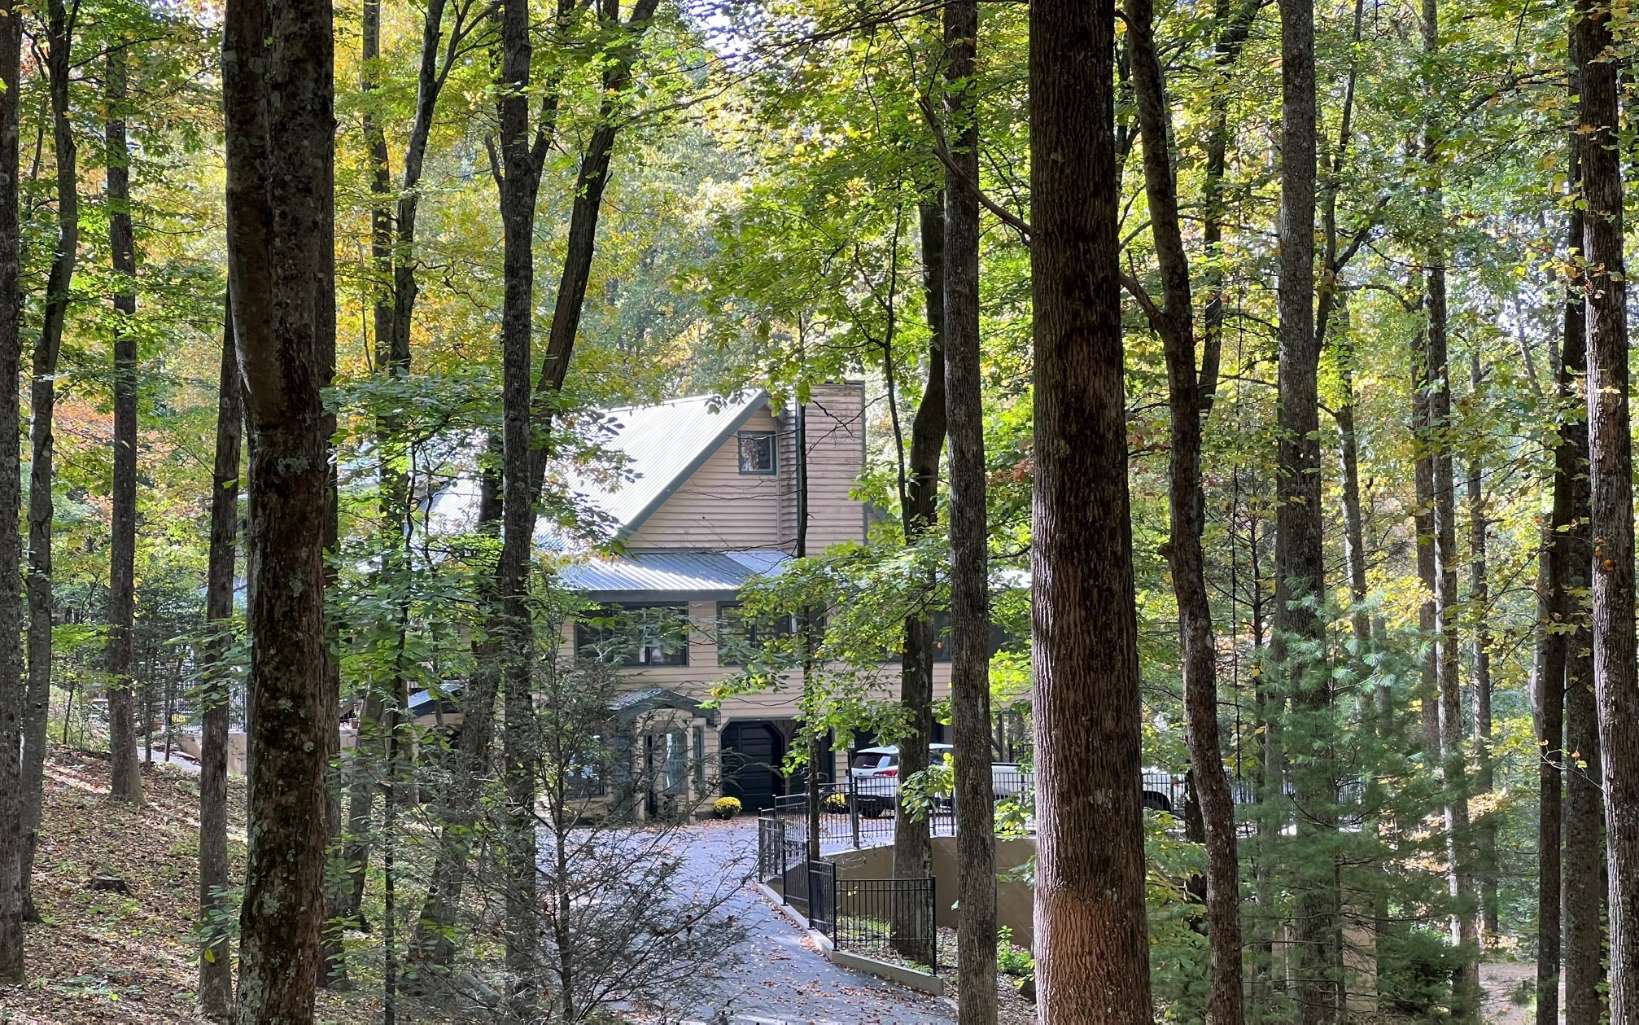 UNIQUE PRIVATE RETREAT, FULLY FURNISHED ON 5.92 ACRES. FOREST SERVICE ON TWO SIDES, 125 FT CREEK FRONTAGE AND CLOSE TO THE APPALACHIAN TRAIL. TWO BEDROOMS ON MAIN, ONE LARGE SUITE UPSTAIRS HAS SITTING AREA WITH FIREPLACE. ONE BEDROOM ON LOWER LEVEL WITH FULL BATH AND SEPARATE ENTRANCE. LARGE OPEN FLOORPLAN PERFECT FOR LARGE GATHERINGS. RICH WOOD DETAIL THROUGHOUT, ELEVATOR, WOOD BURNING FIREPLACE IN GREAT ROOM, WIRING IN PLACE FOR GENERATOR. DON'T MISS THIS ONE! PRICE BASED ON CURRENT APPRAISAL